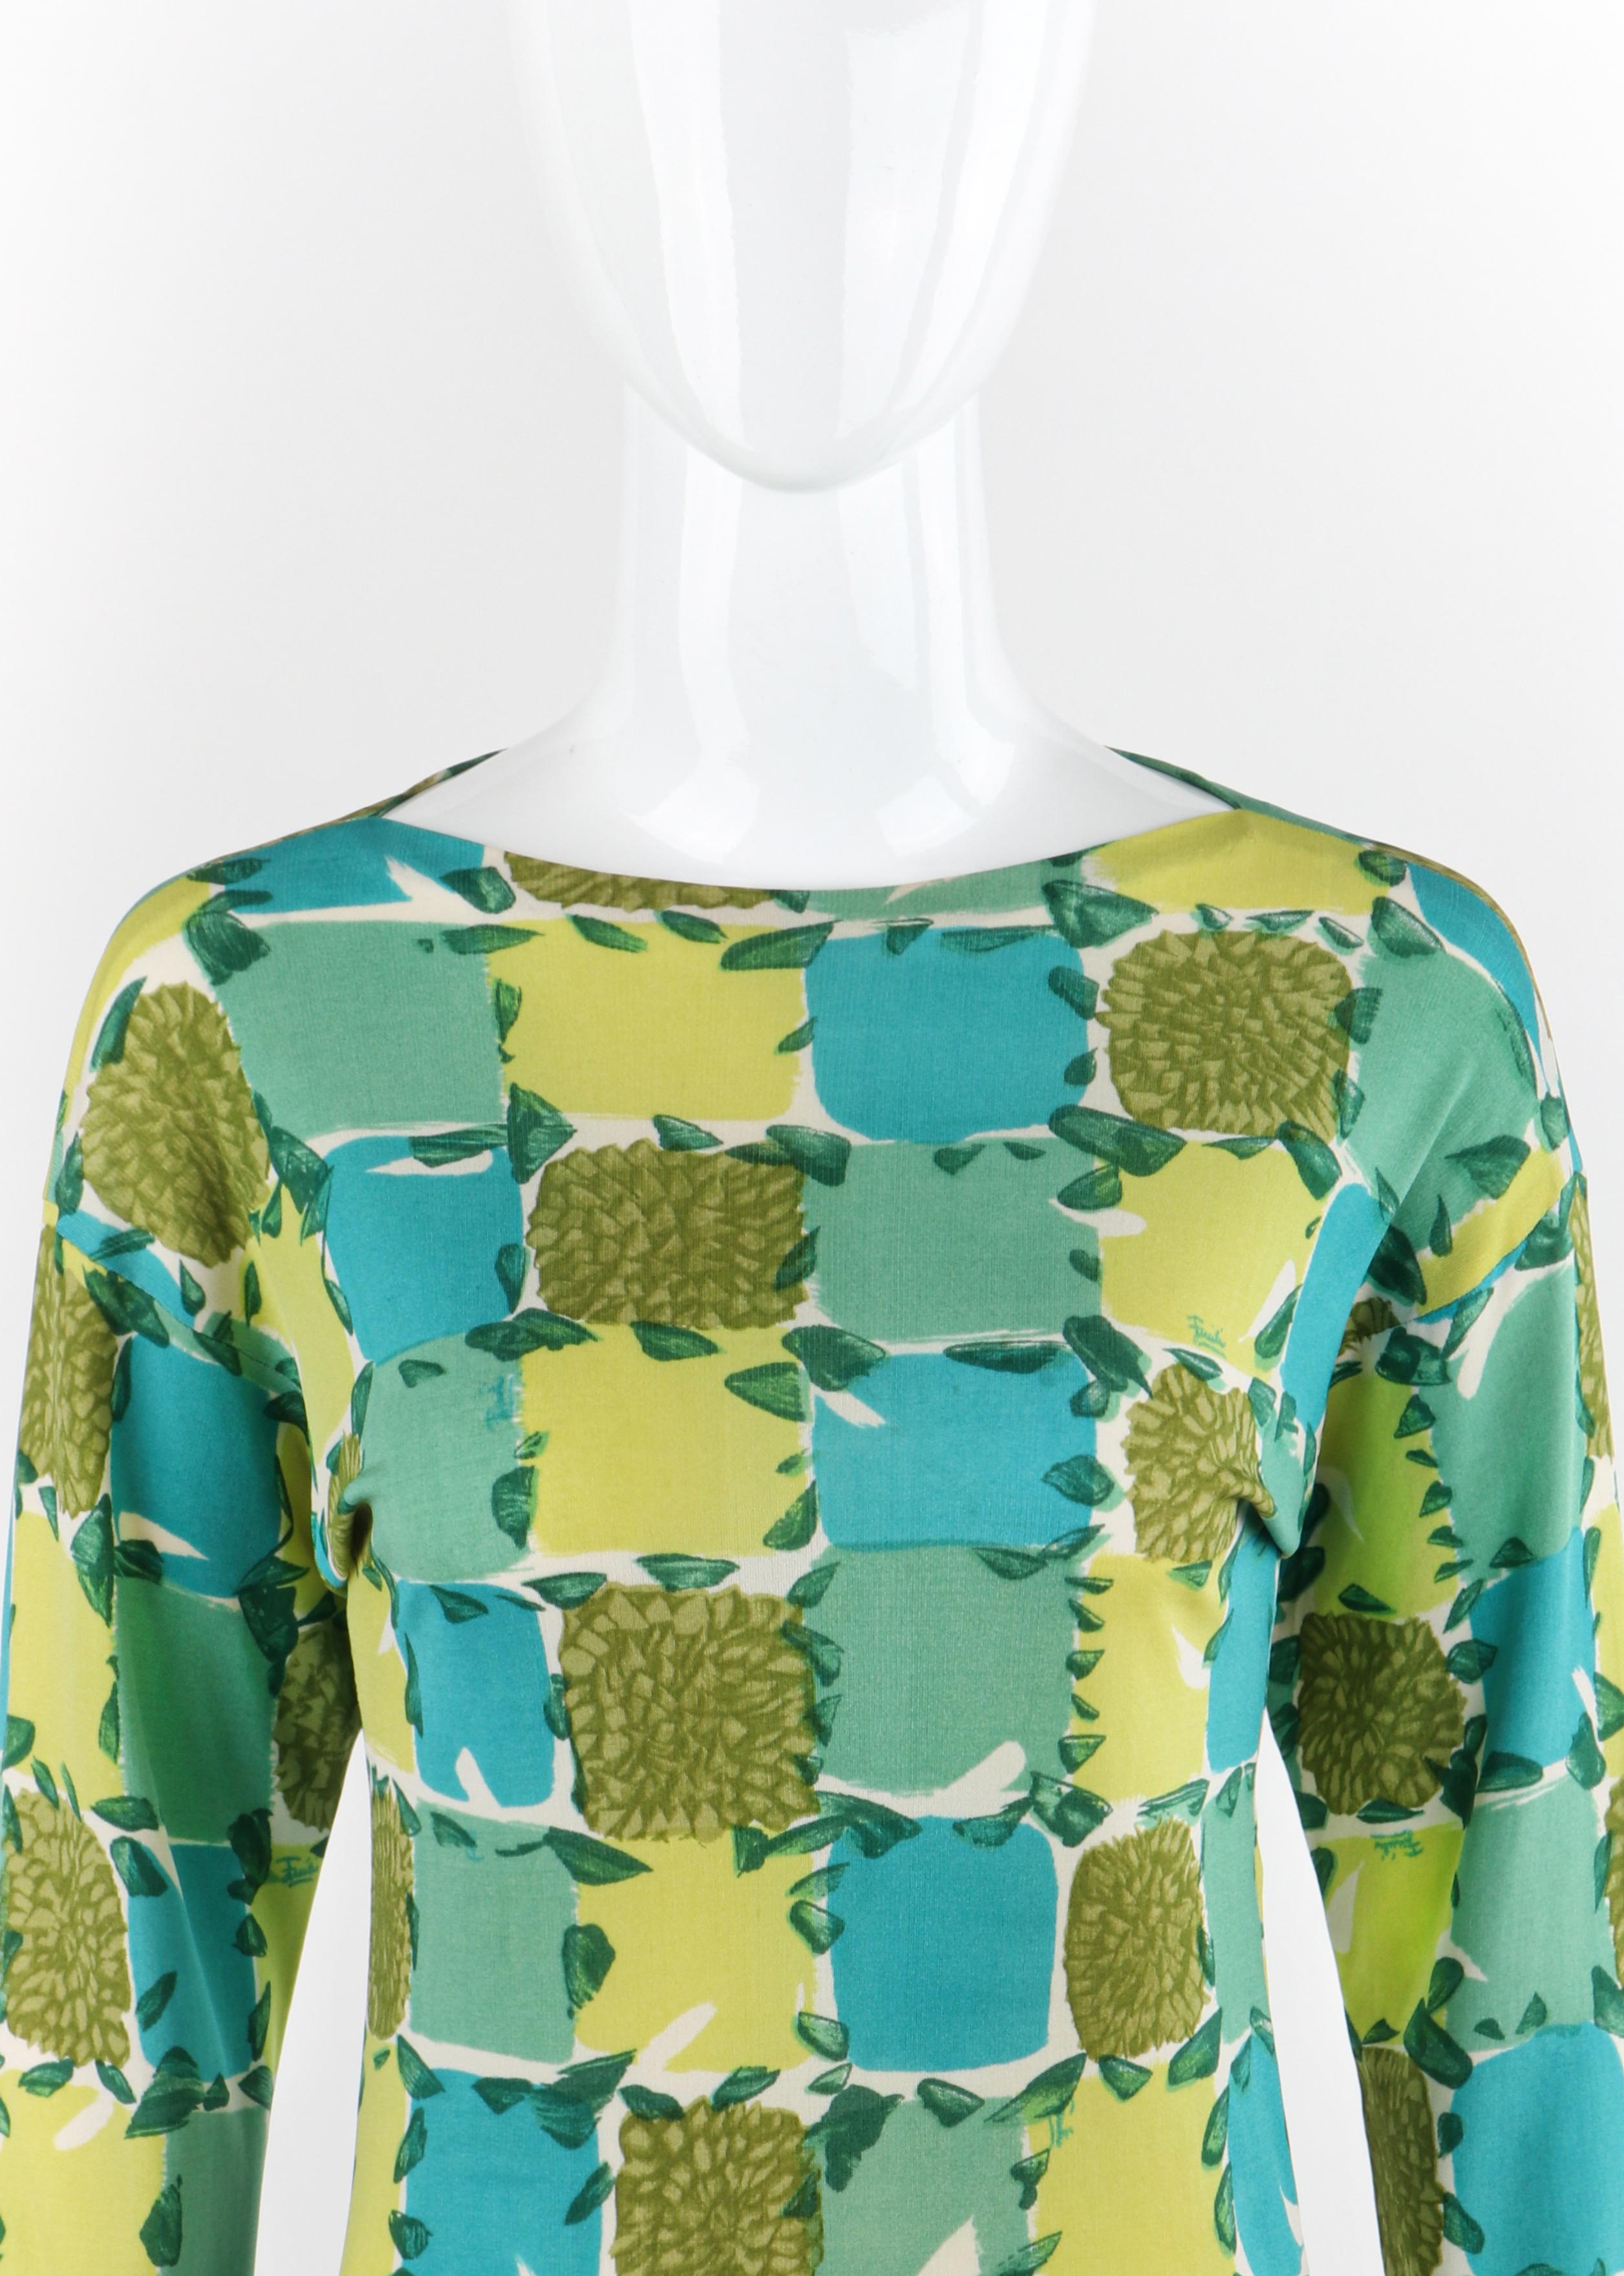 Women's EMILIO PUCCI c.1956 Blue Yellow Green Abstract Floral Check Print Silk Sweater For Sale